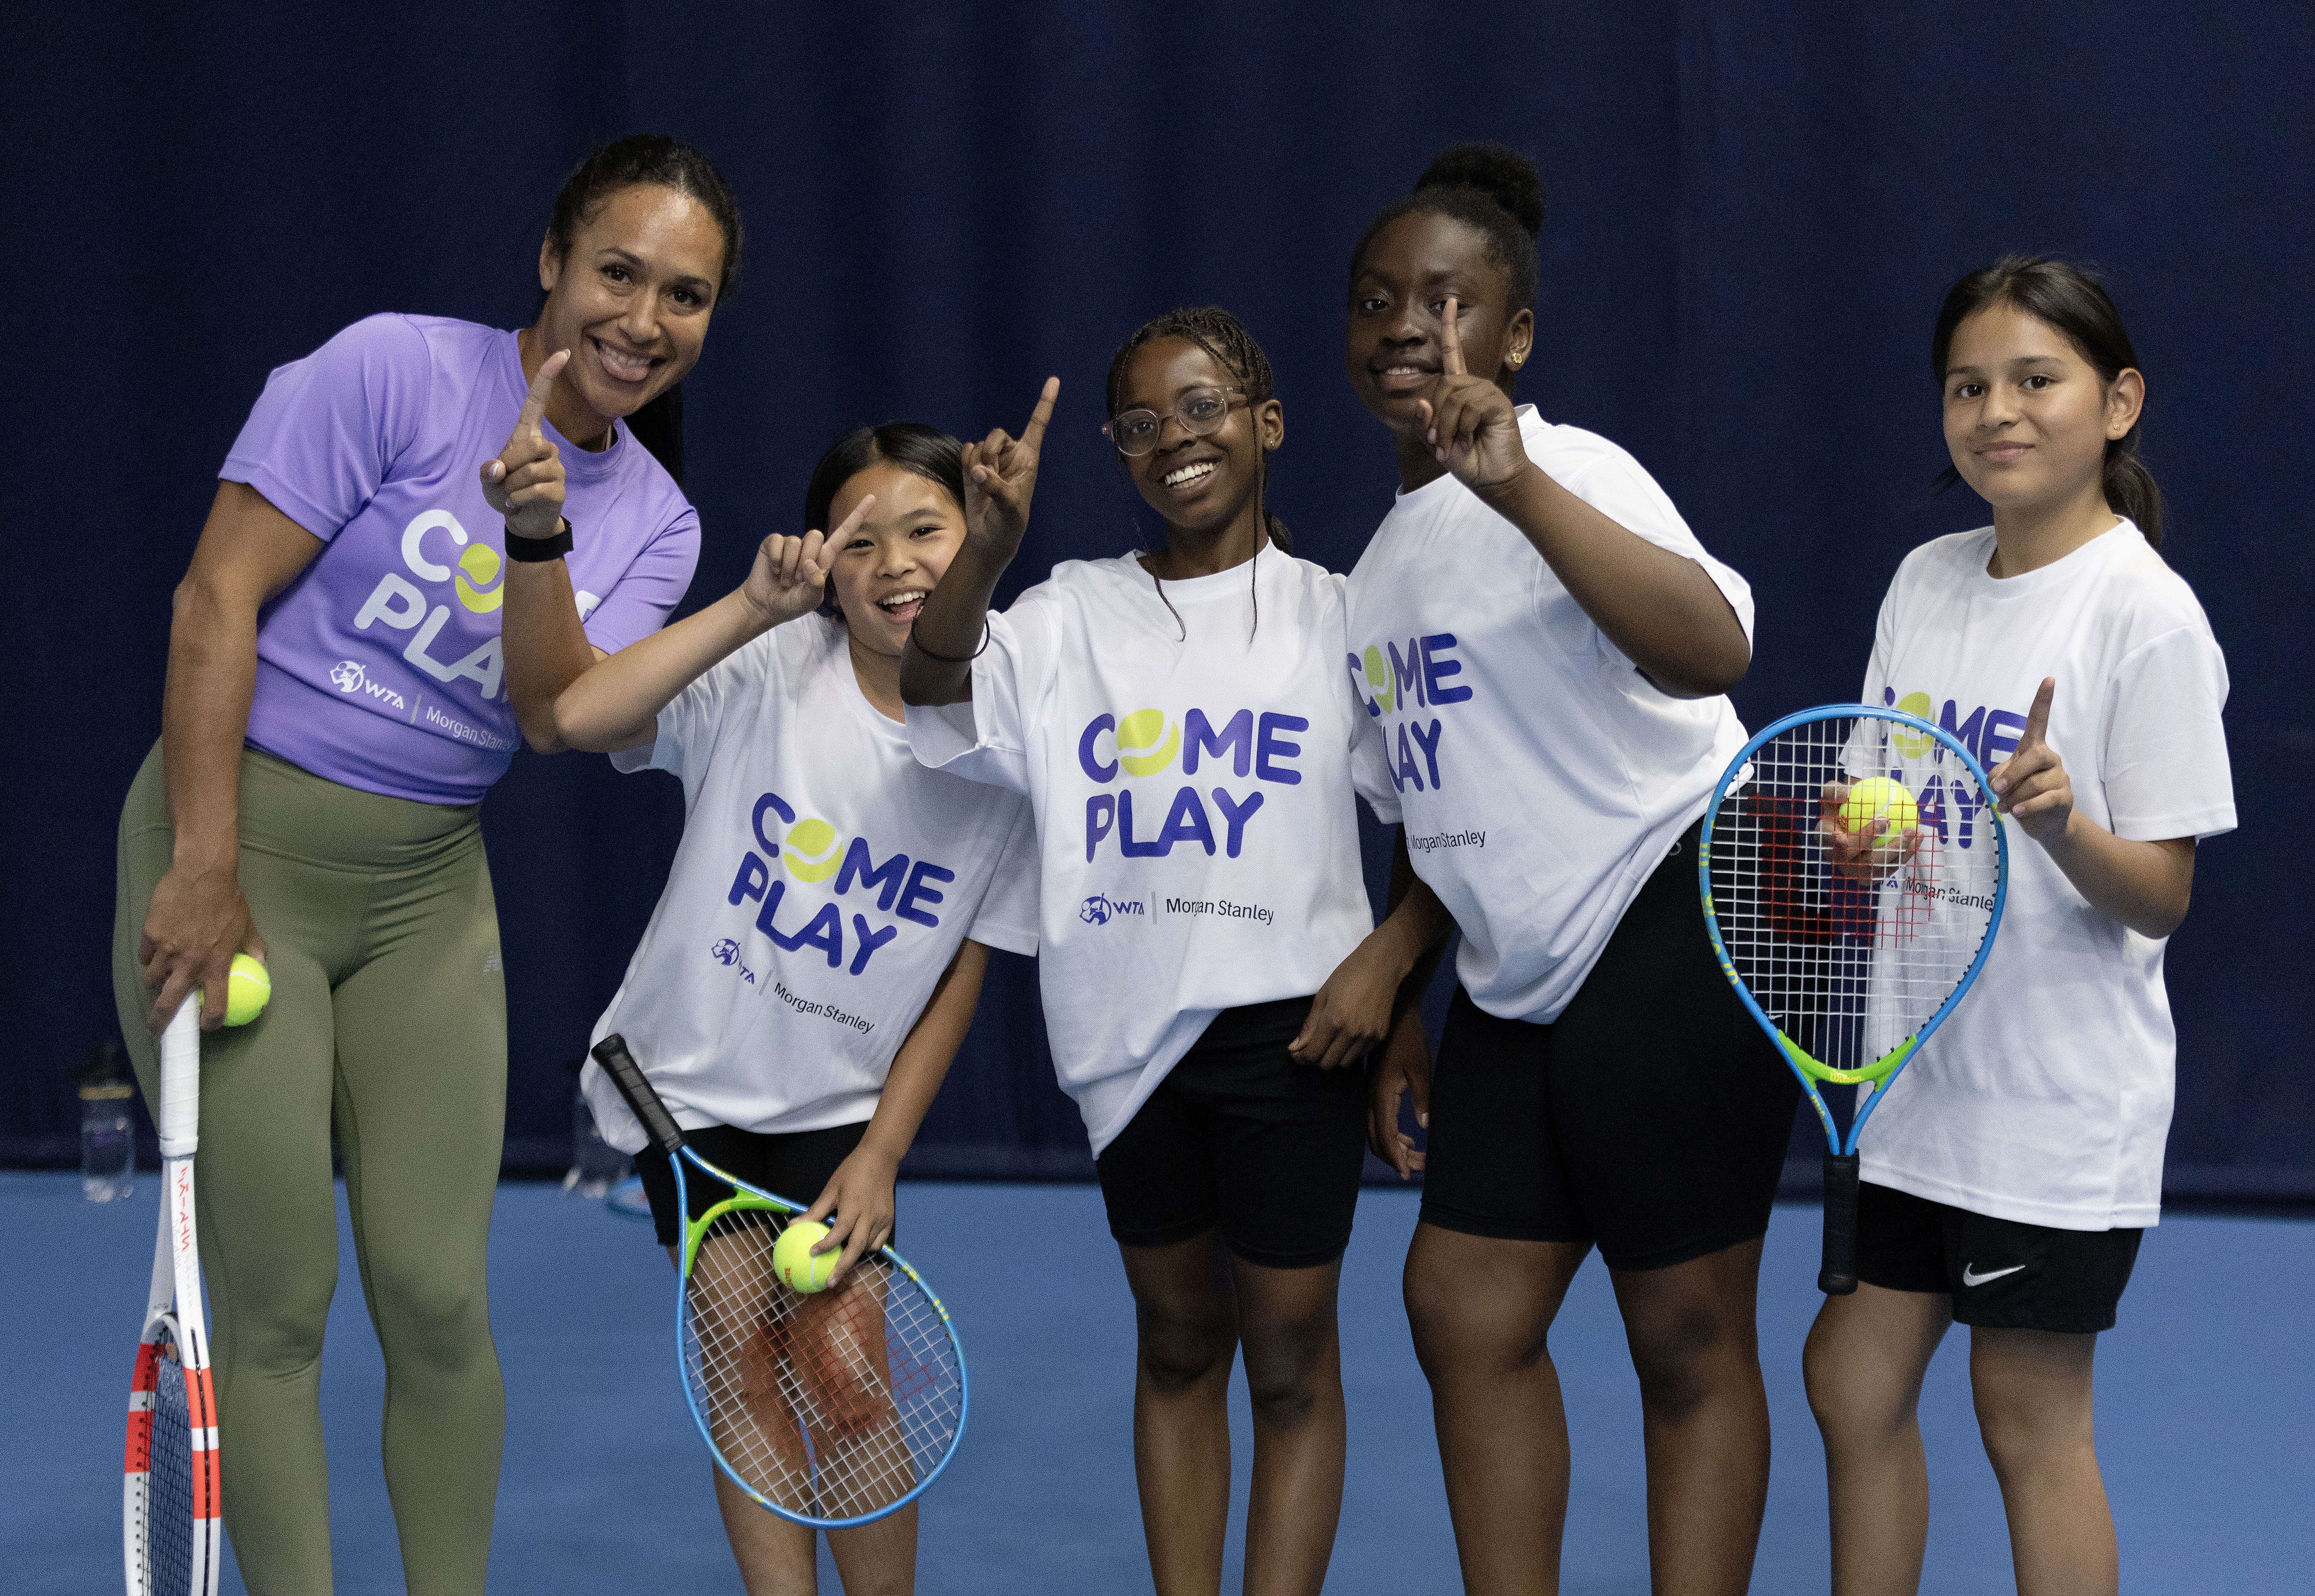 Heather Watson, left, poses with children from Elena Baltacha's Foundation during a Come Play presented by Morgan Stanley day in London